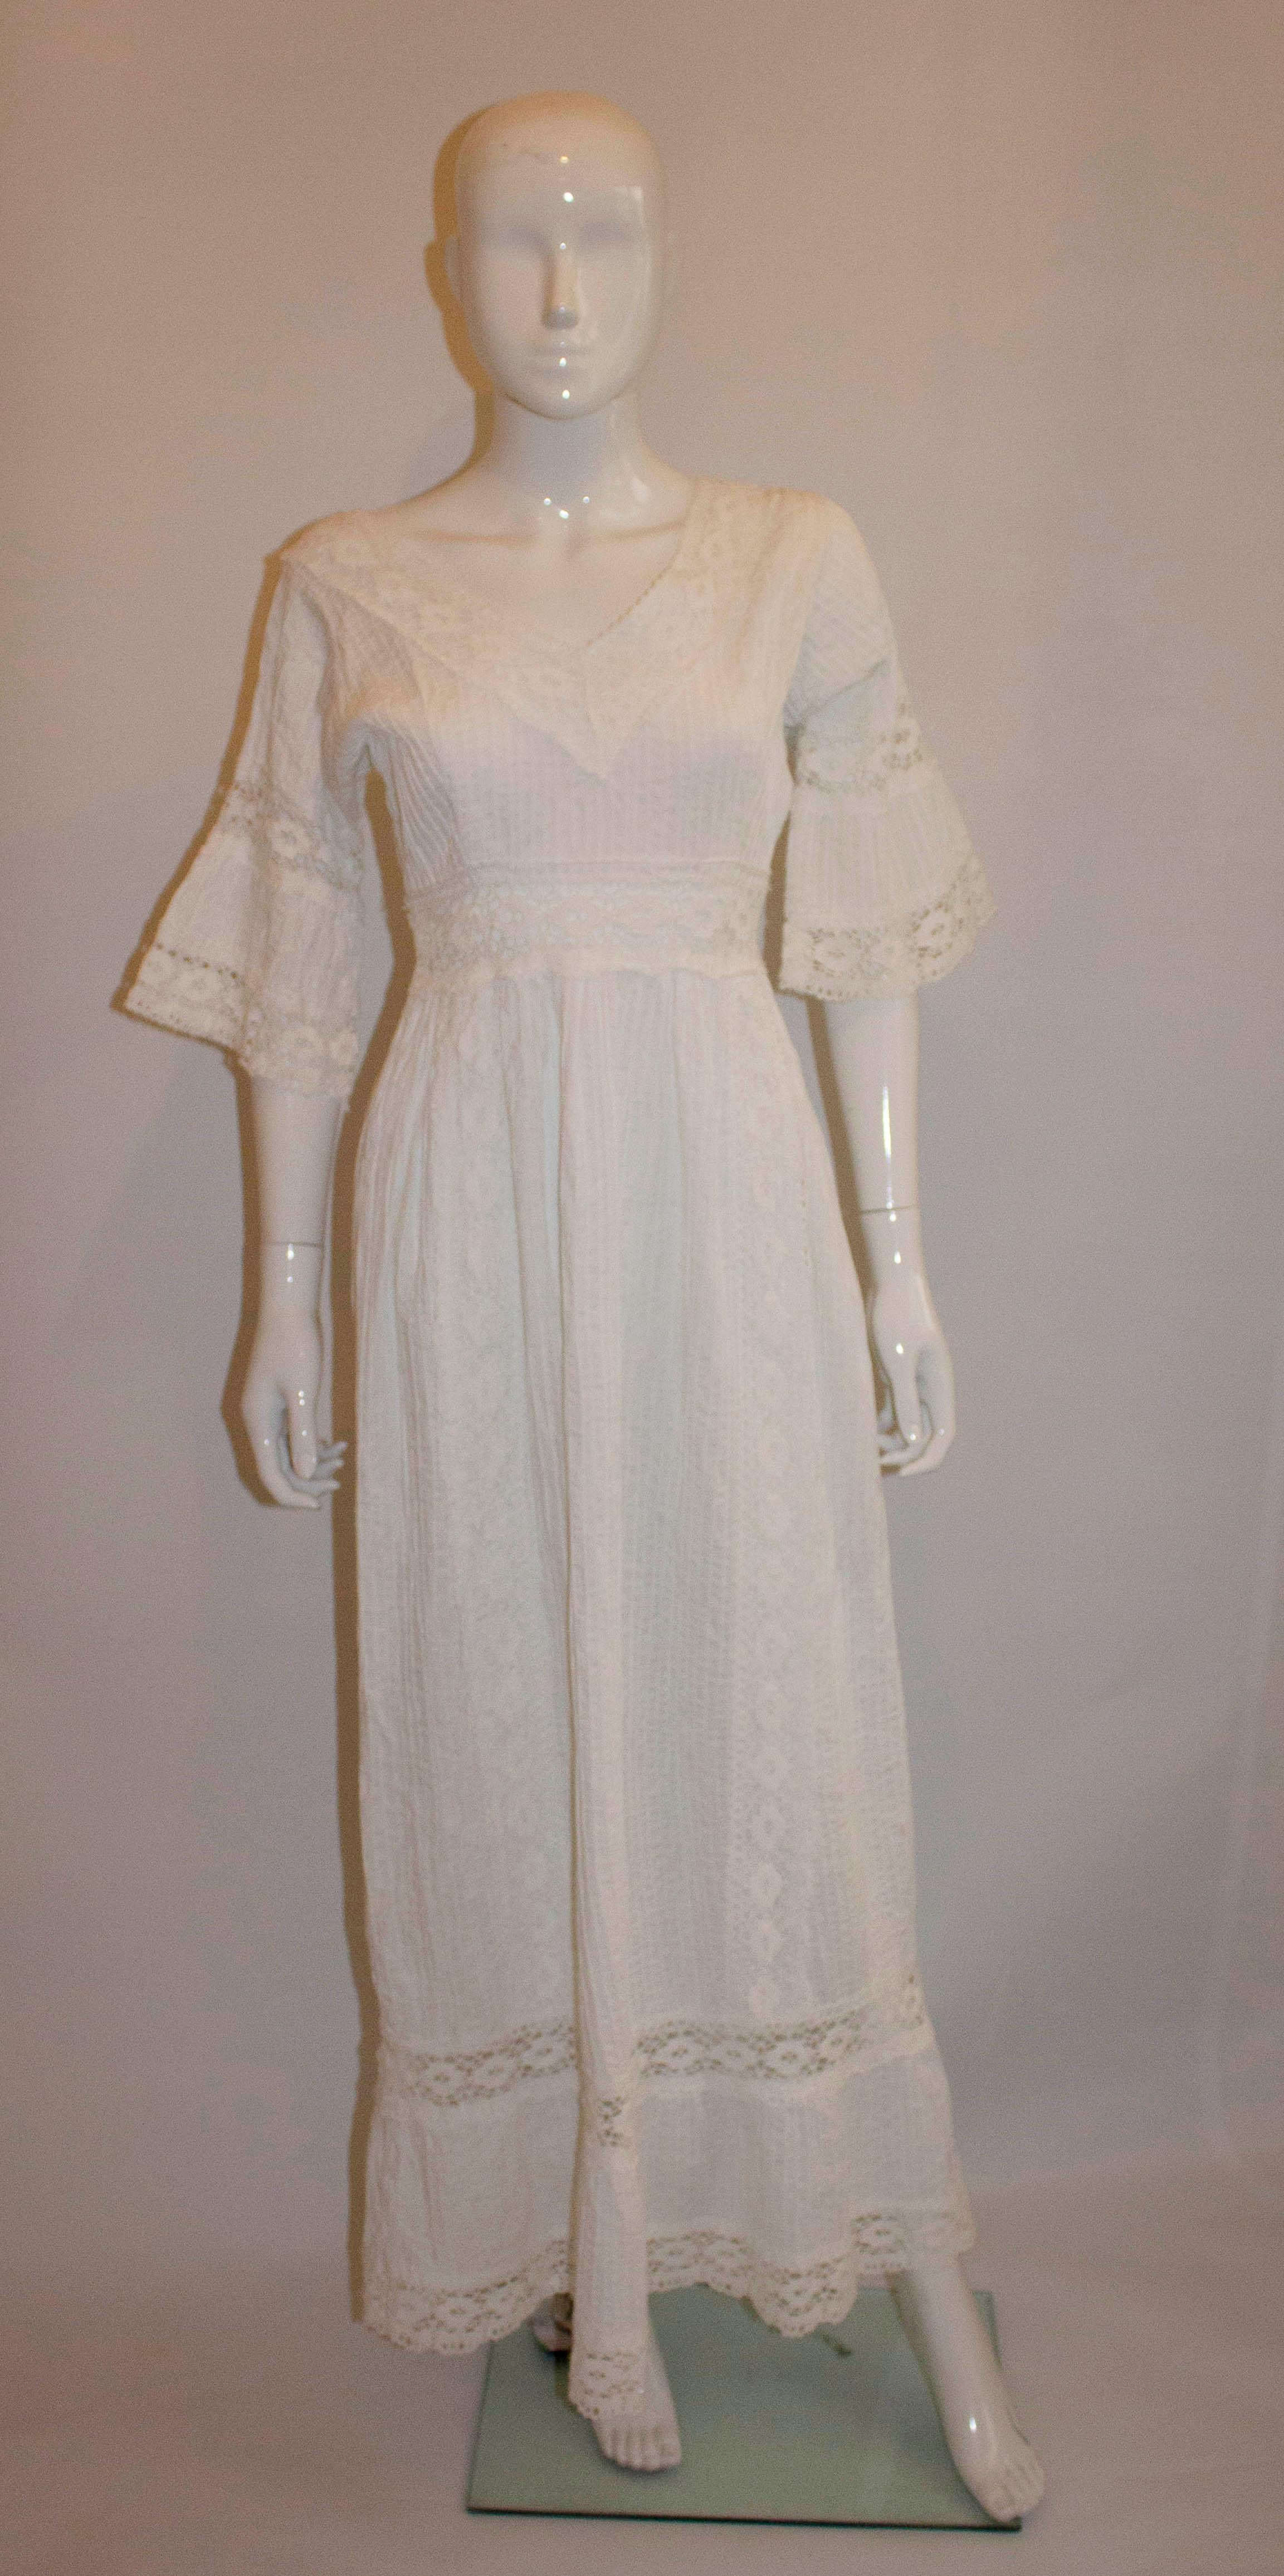 A wonderful vintage white evening gown. The dress has a v neckline and backline with a lot of pintuck detail. It has flared elbow length sleaves , a central back zip and lace detail at the hem.
Measurements: Bust 35'', waist 27'', length 60''